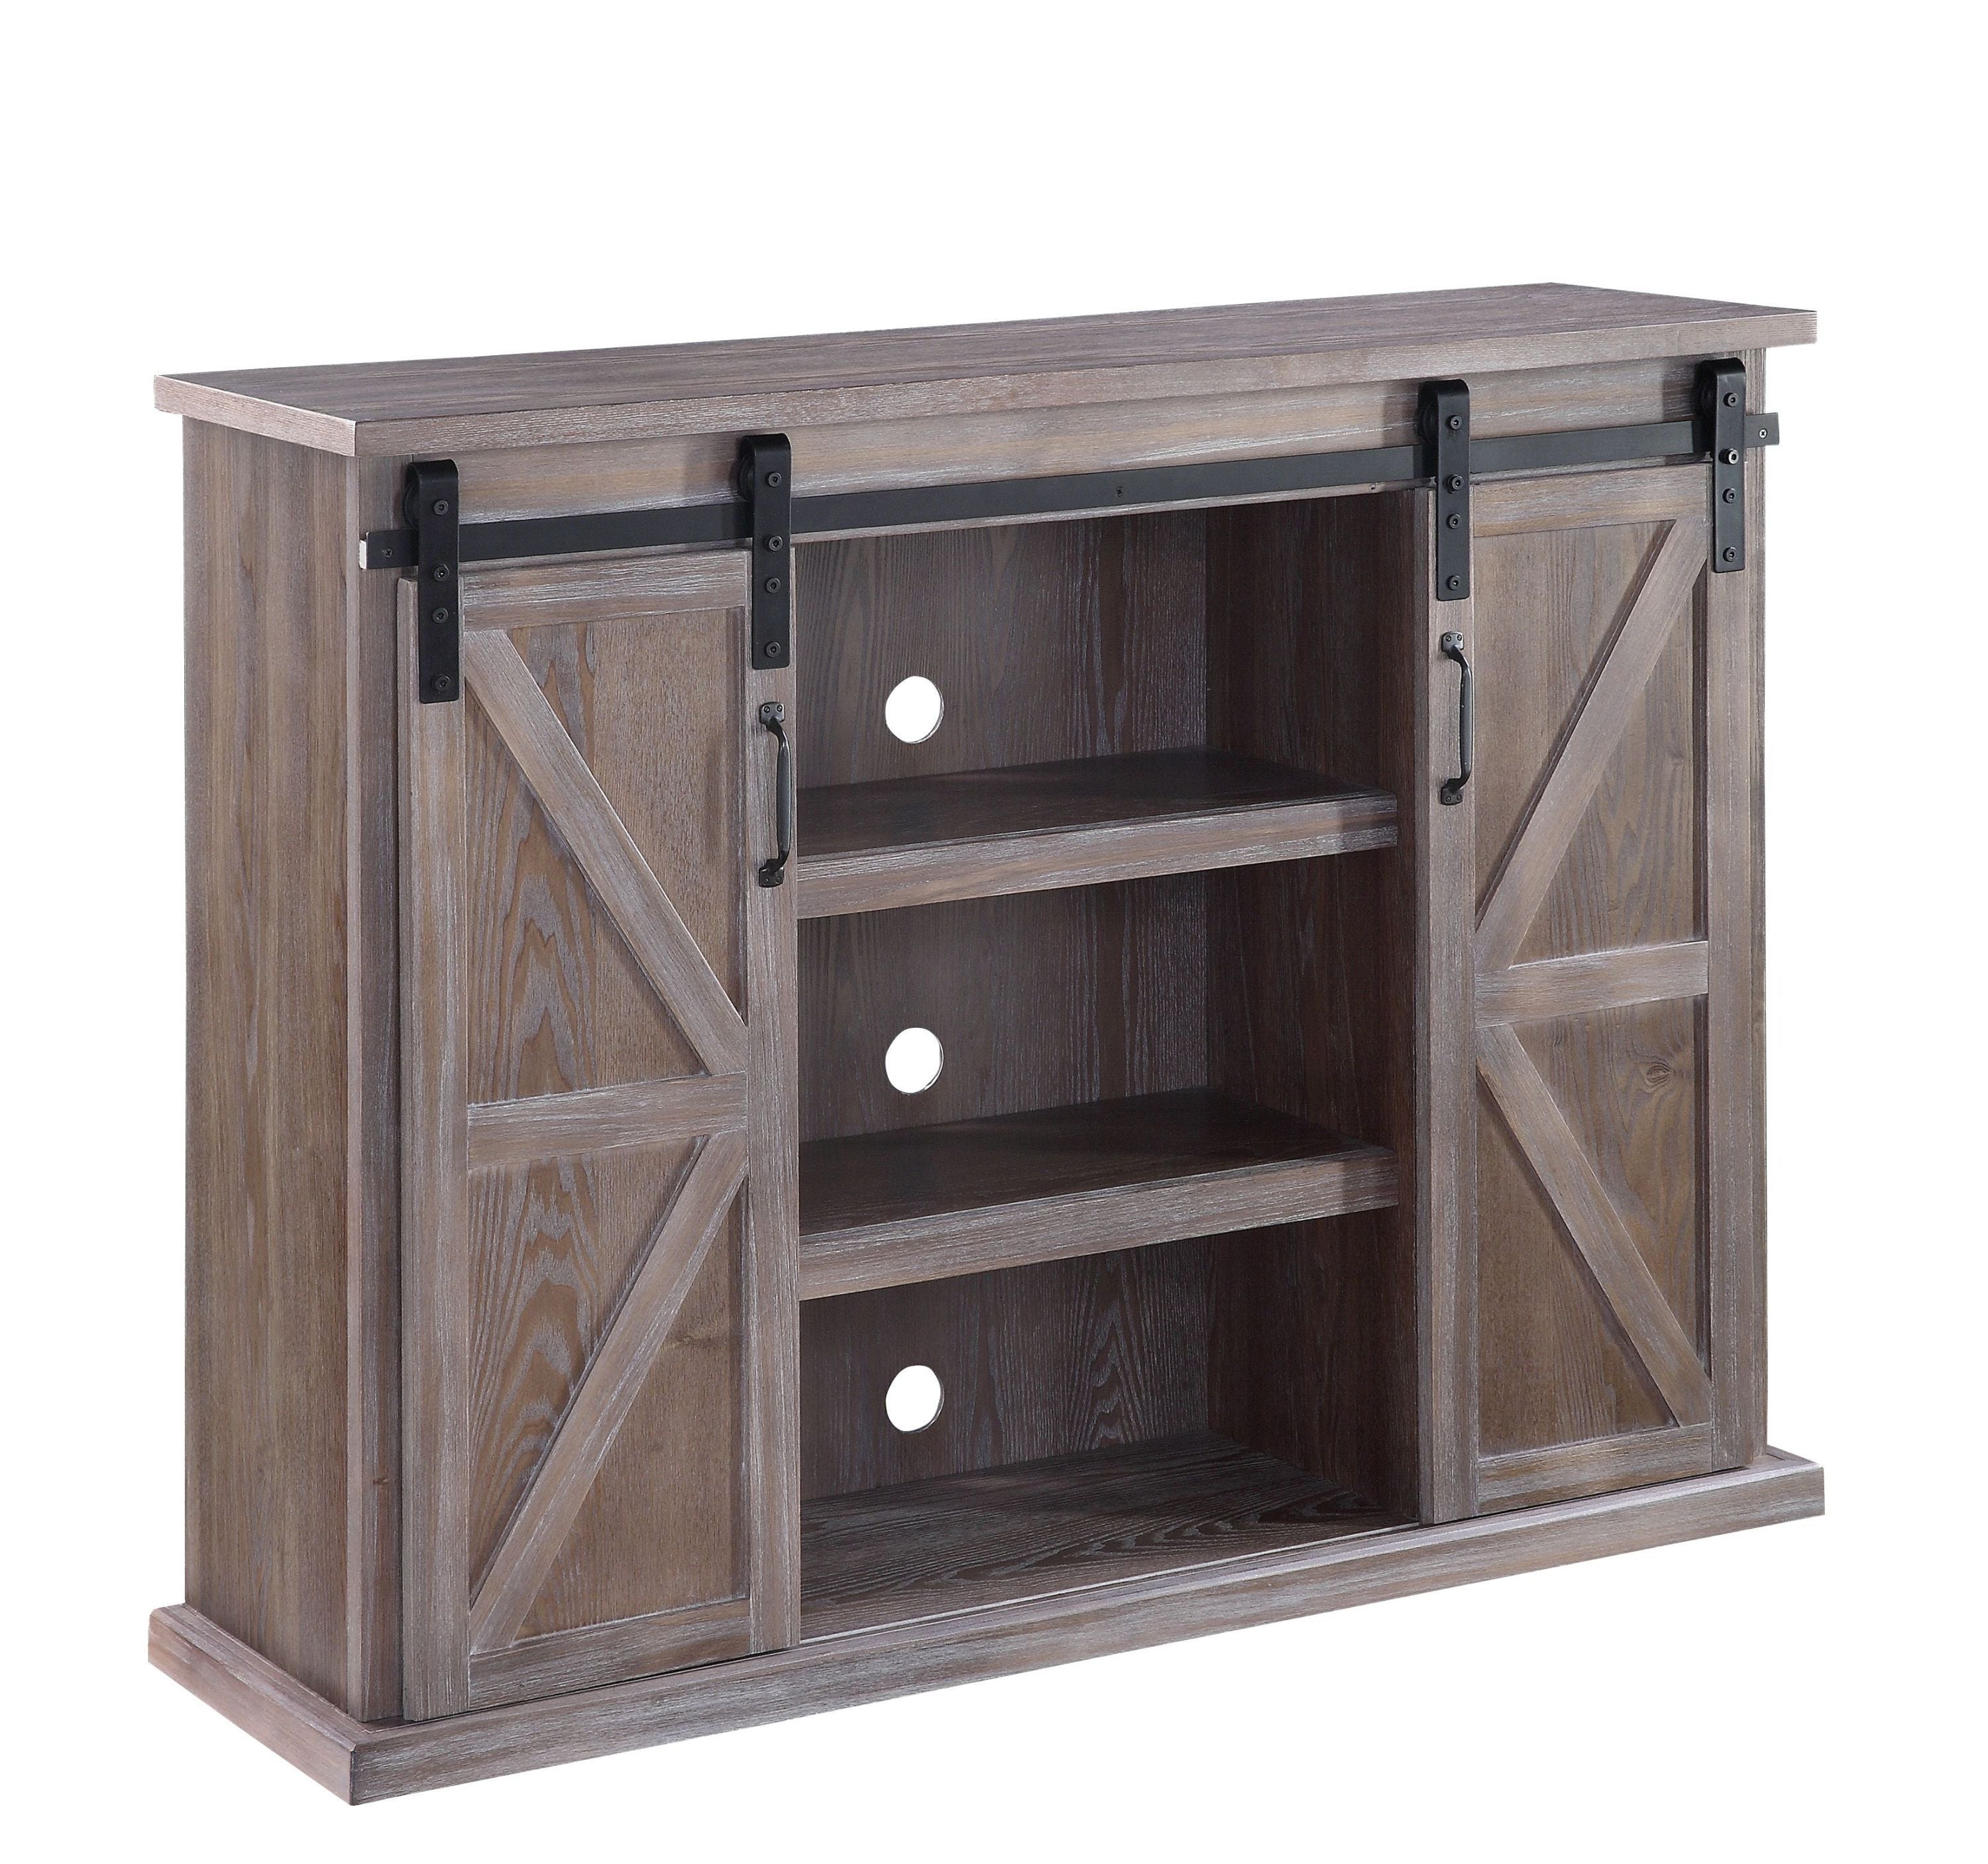 48“ TV Stand with 2 Sliding Barn Doors & 9 Compartments, Rustic Natural